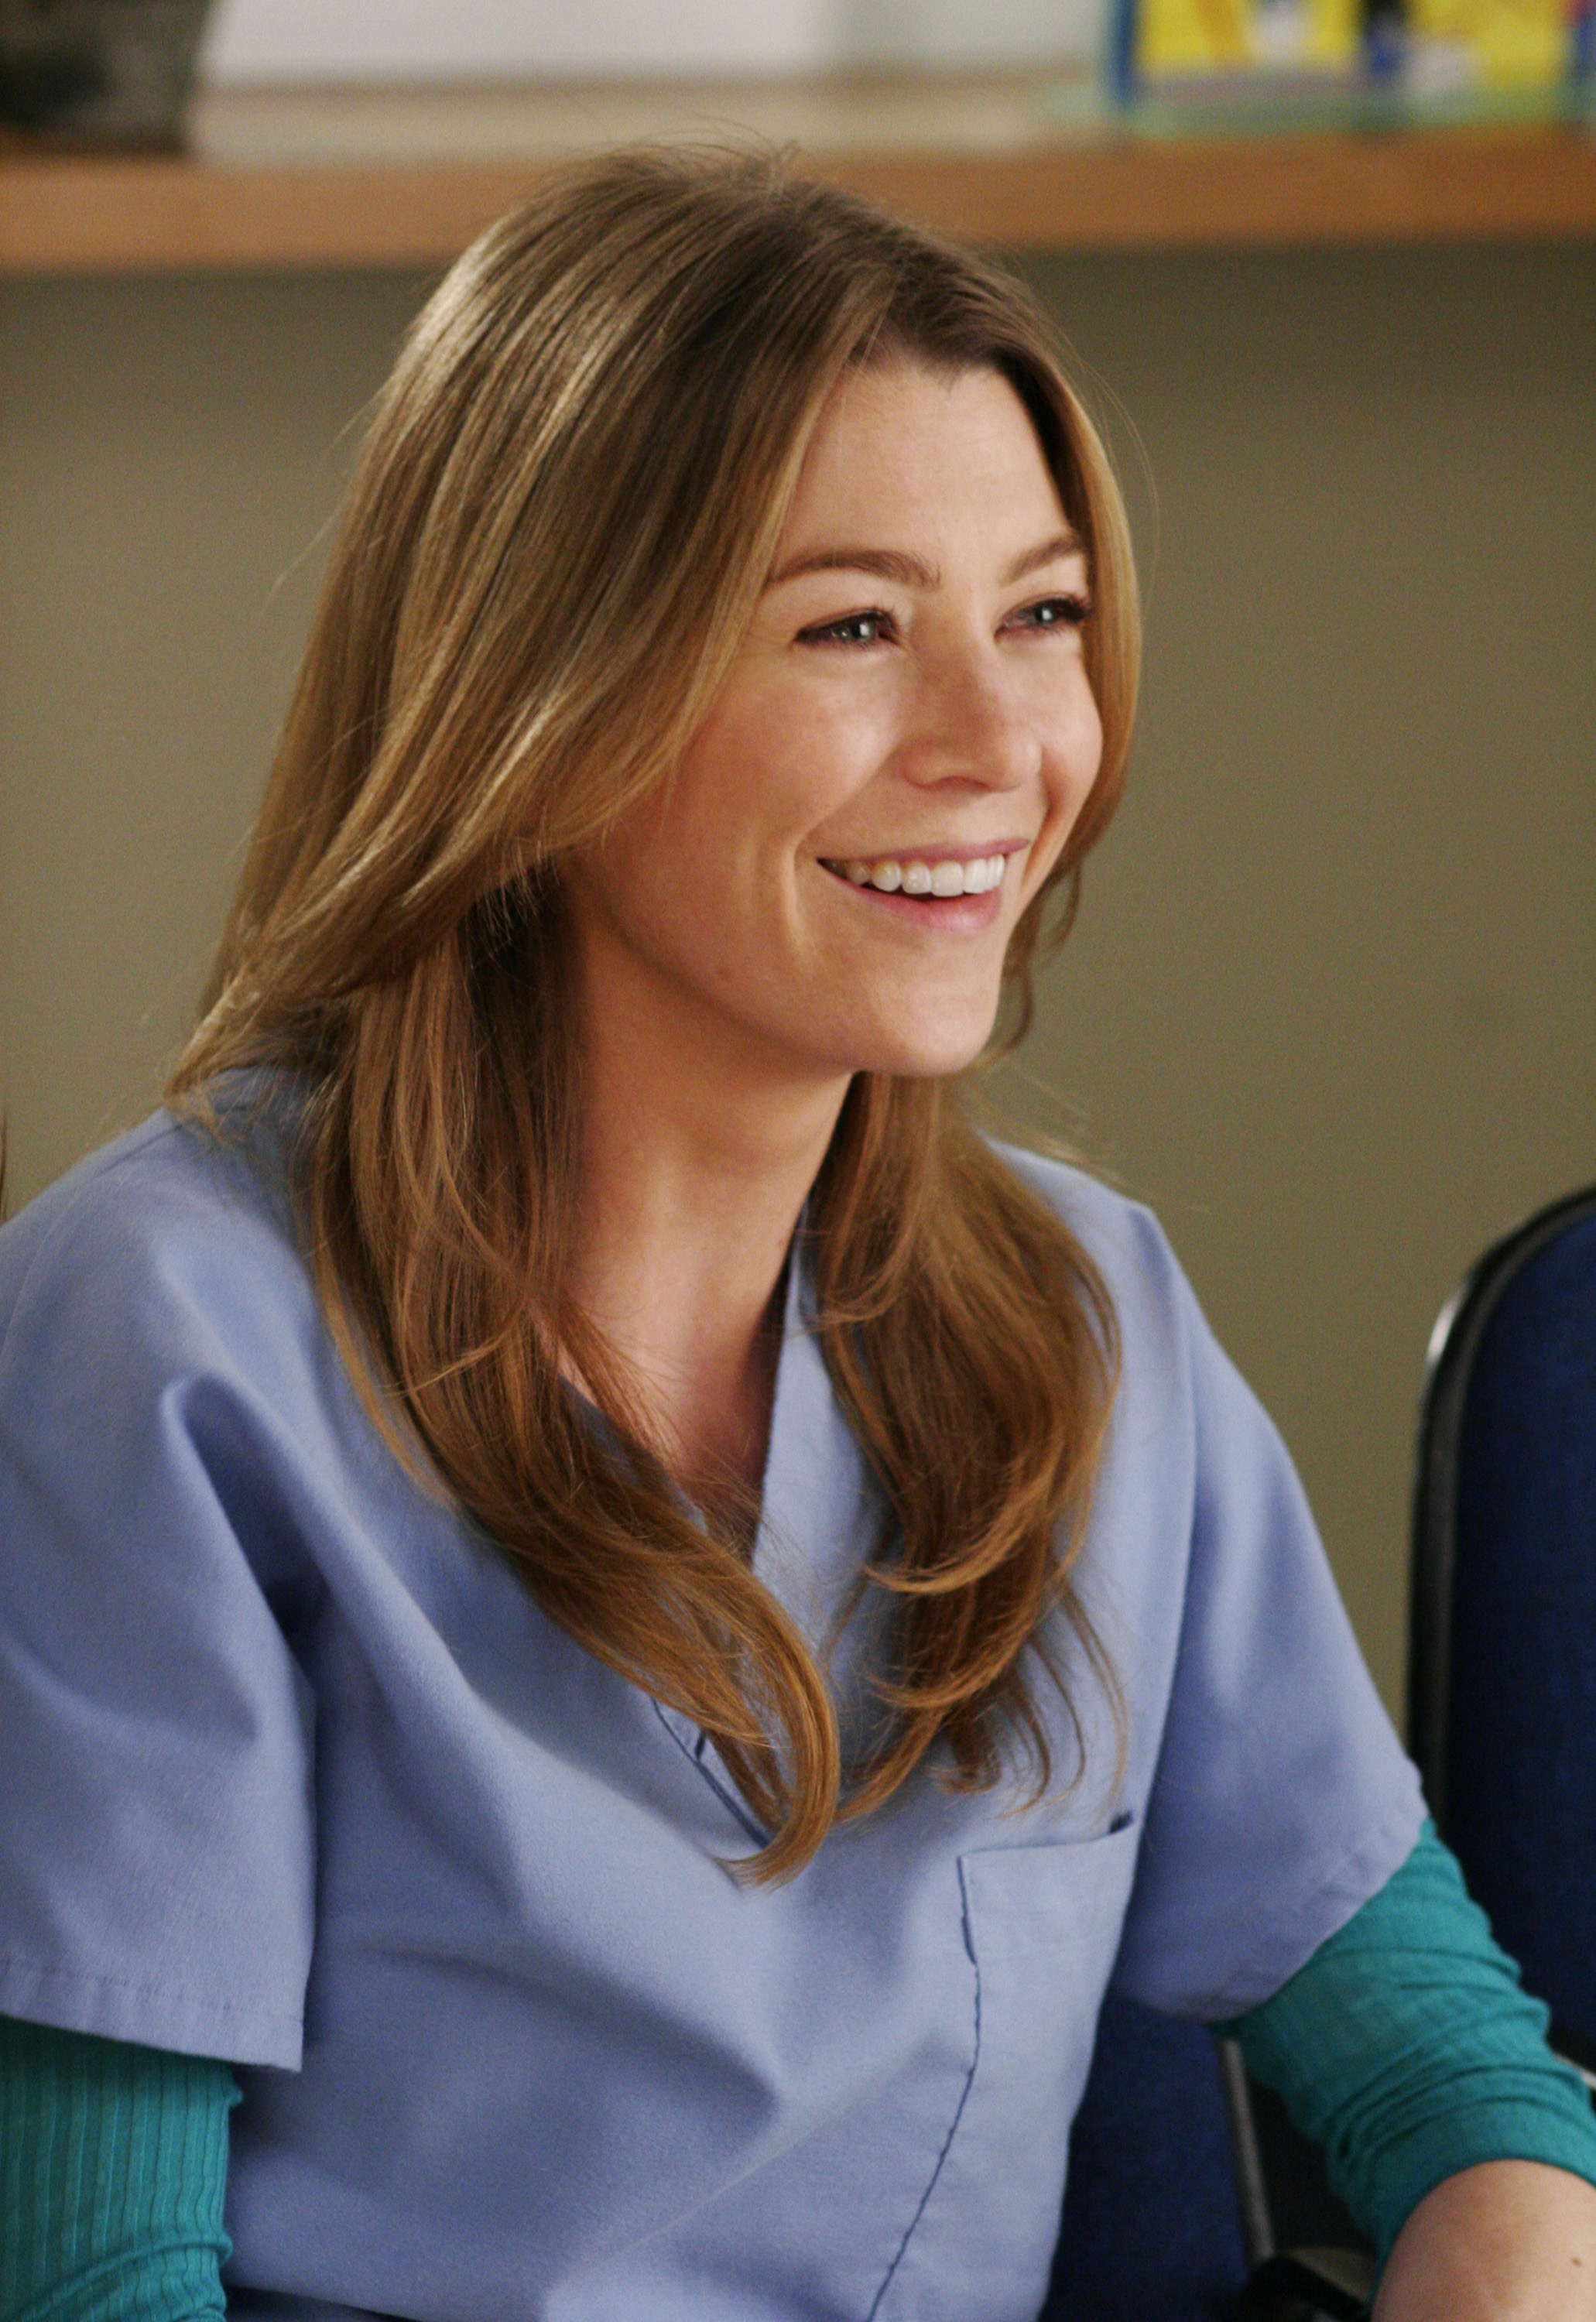 A close-up of Meredith Grey, in scrubs, smiling